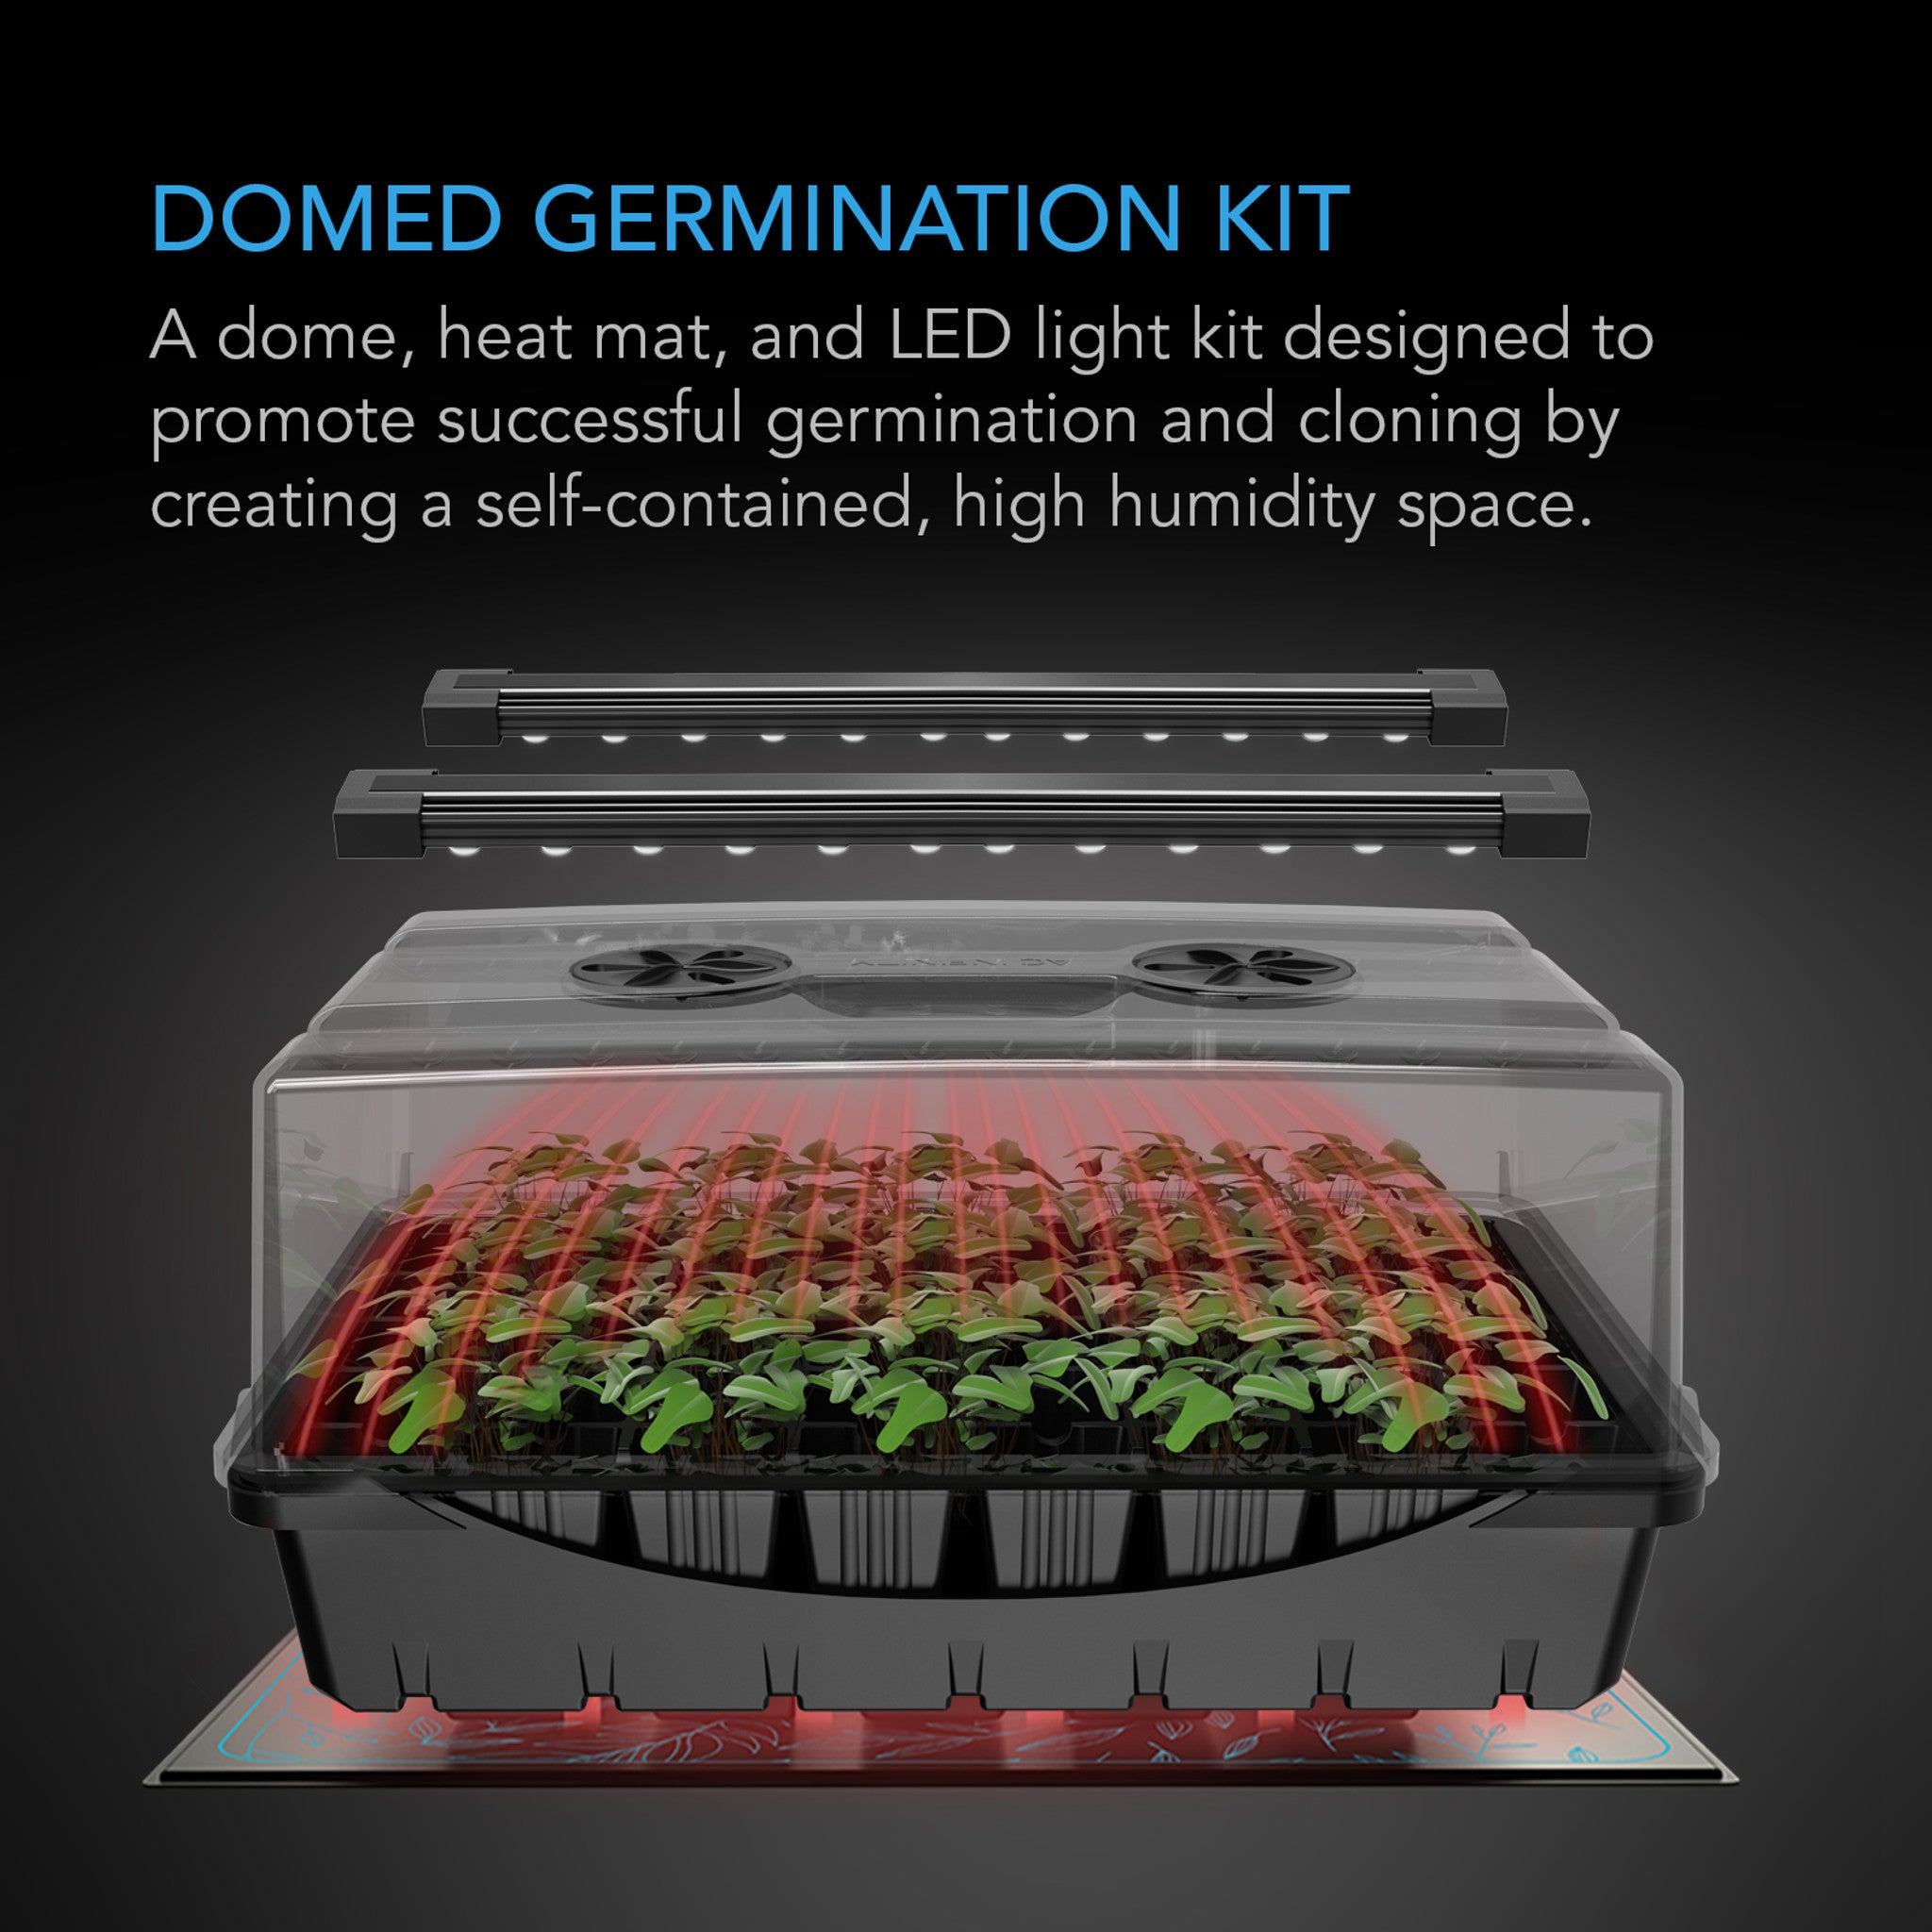 HUMIDITY DOME, GERMINATION KIT WITH LED GROW LIGHT BARS, 5X8 CELL TRAY